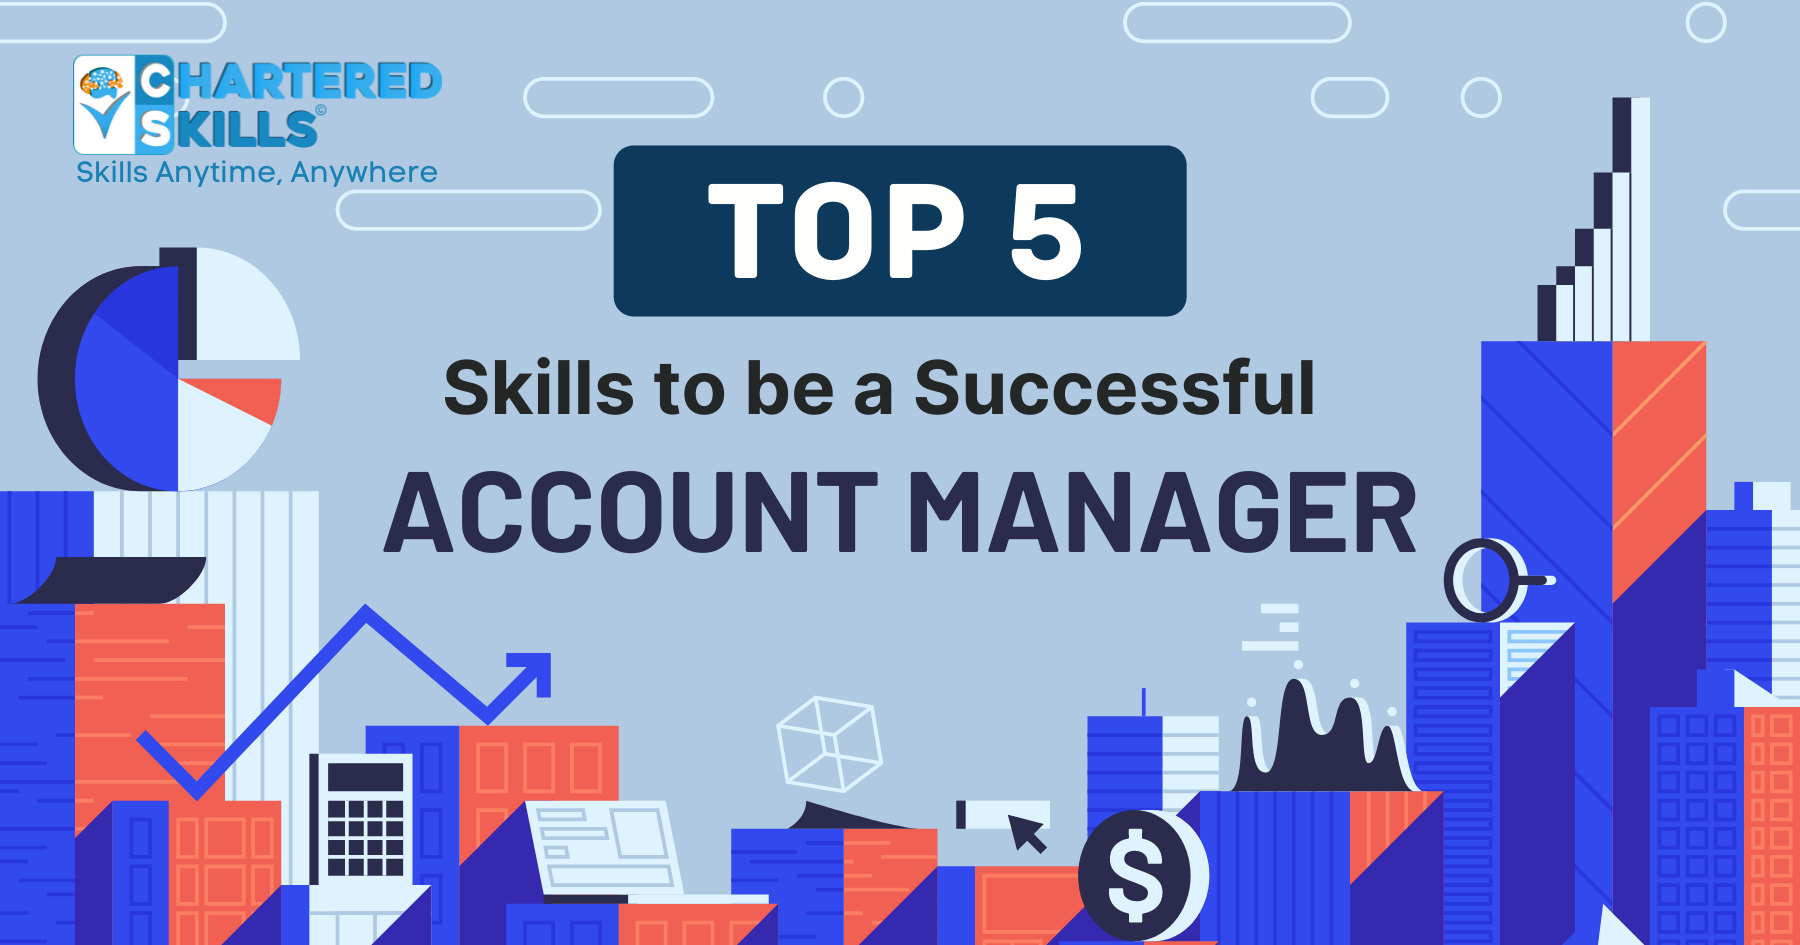 Be a successful account manager?